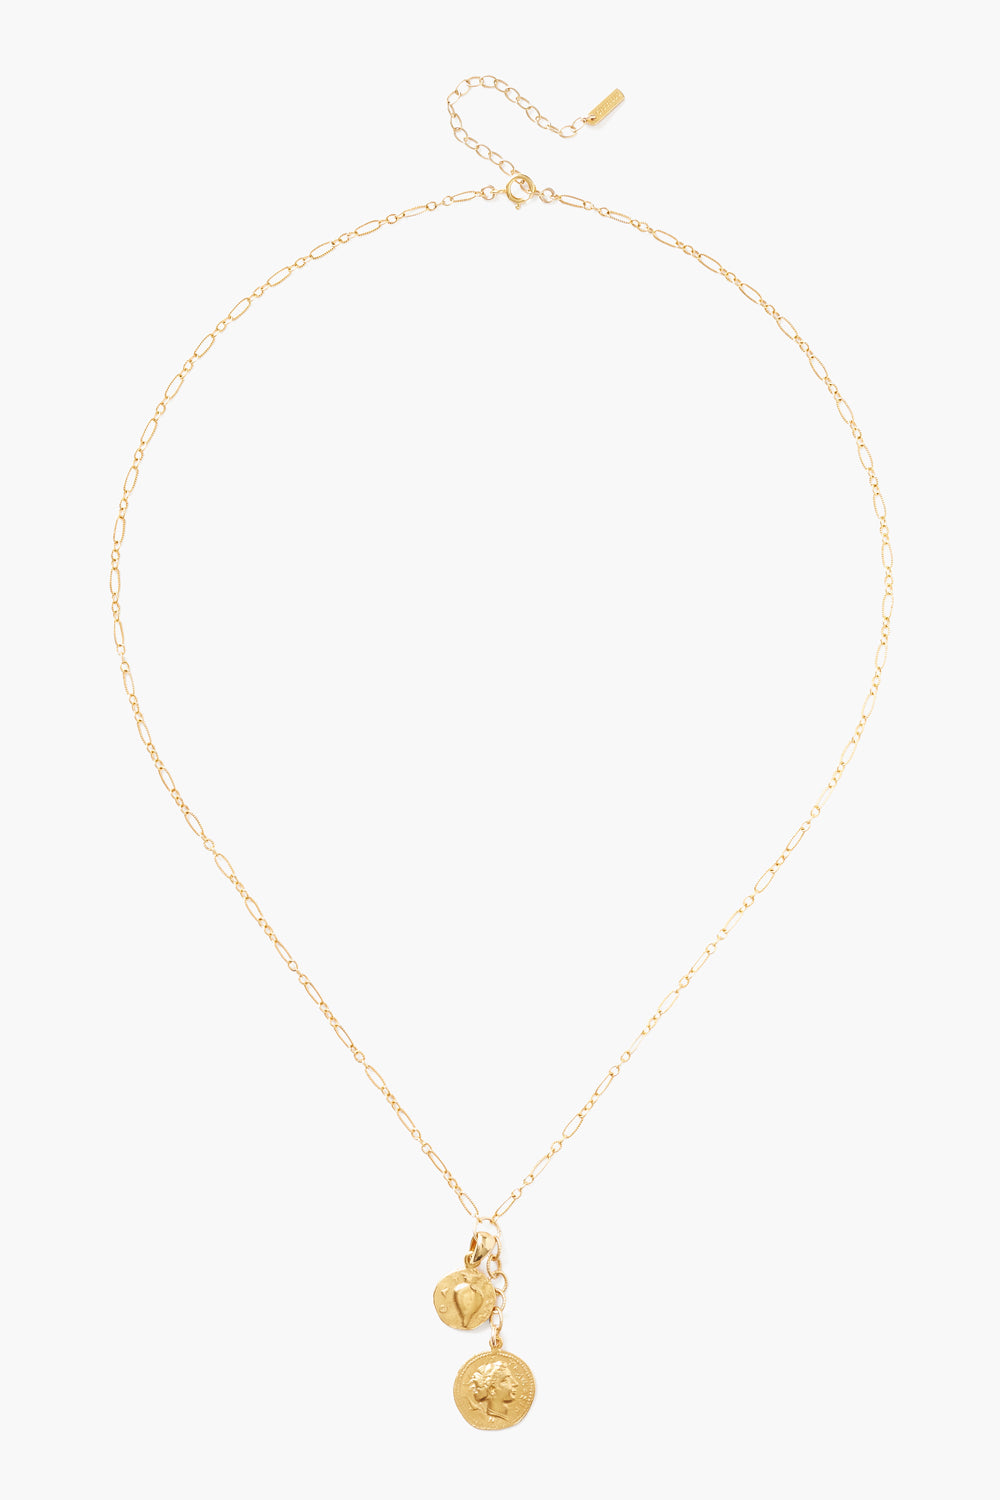 YELLOW GOLD ADJUSTABLE COIN ON ETCHED CHAIN NECKLACE - Kingfisher Road - Online Boutique